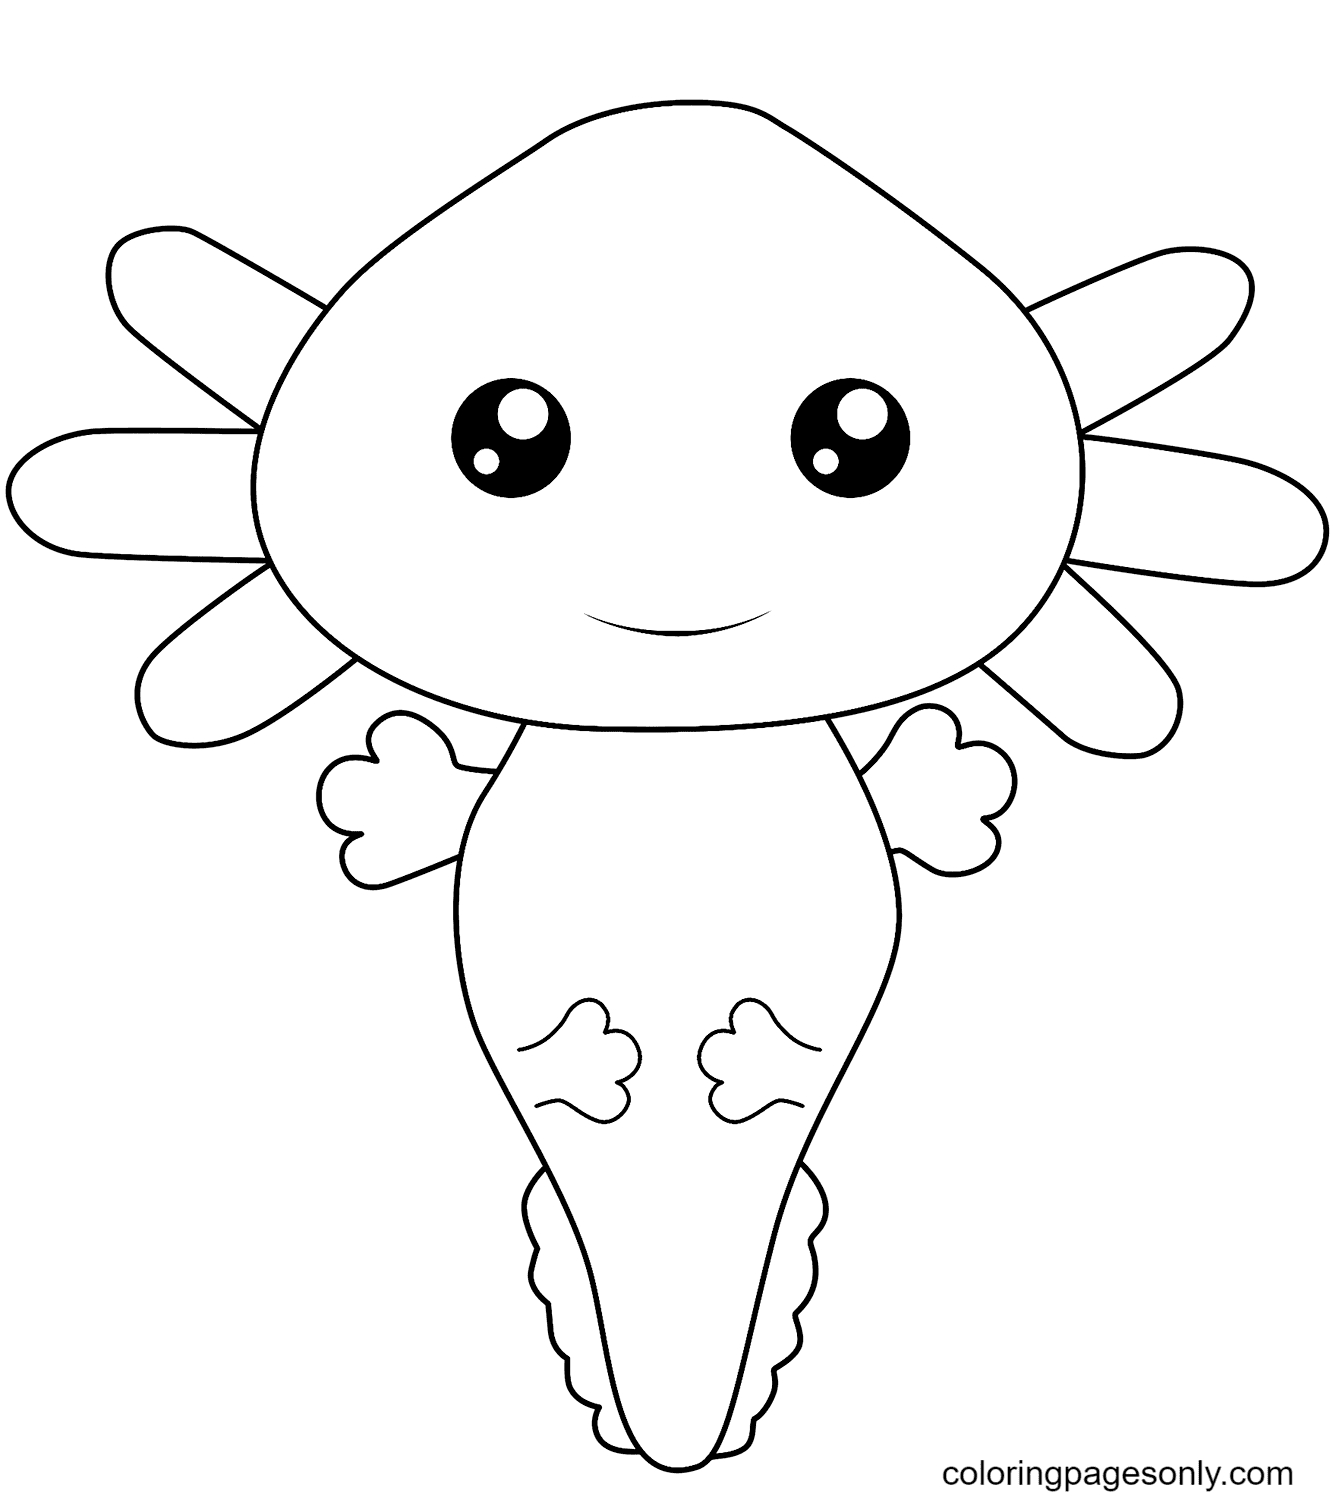 Live coloring cute frog